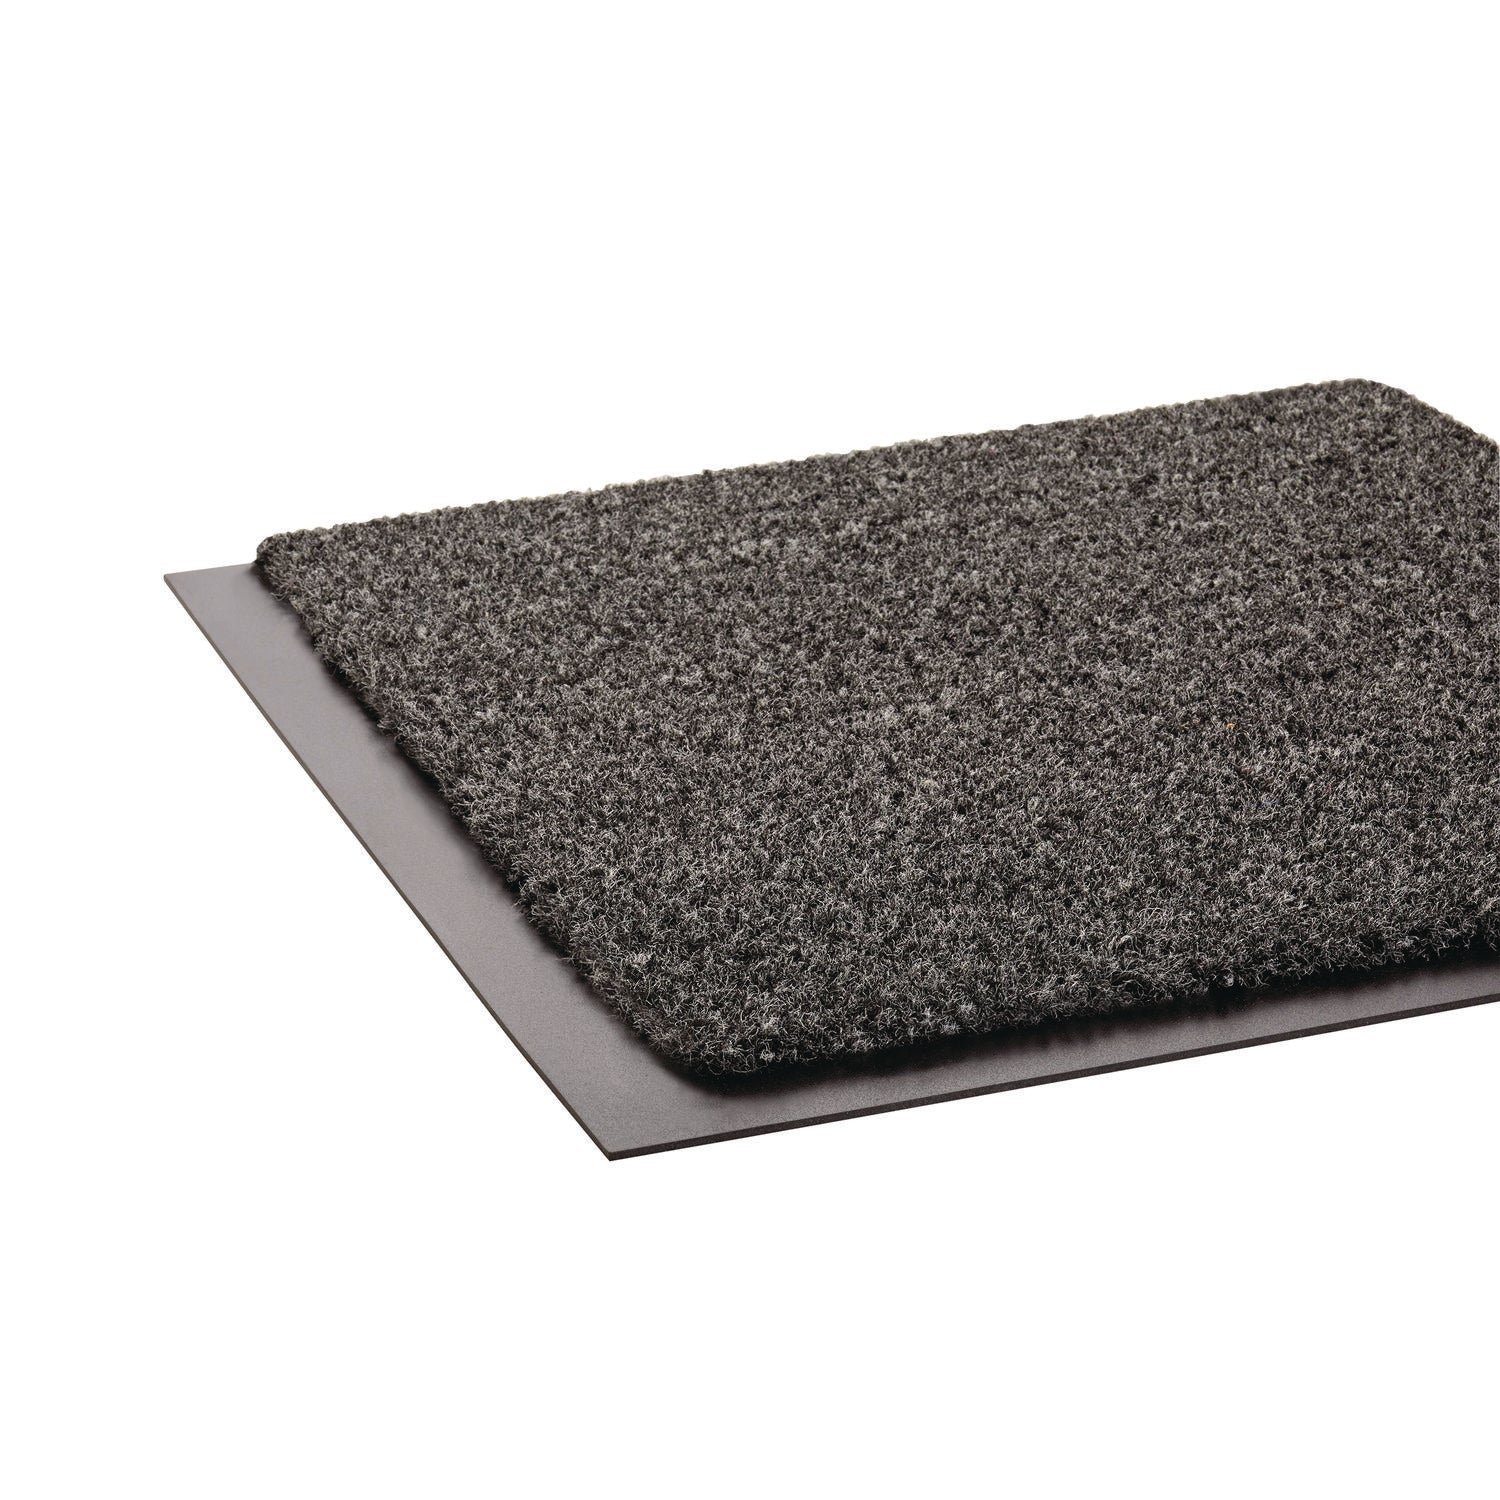 Rely-On Olefin Indoor Wiper Mat, 36 x 120, Charcoal - 3